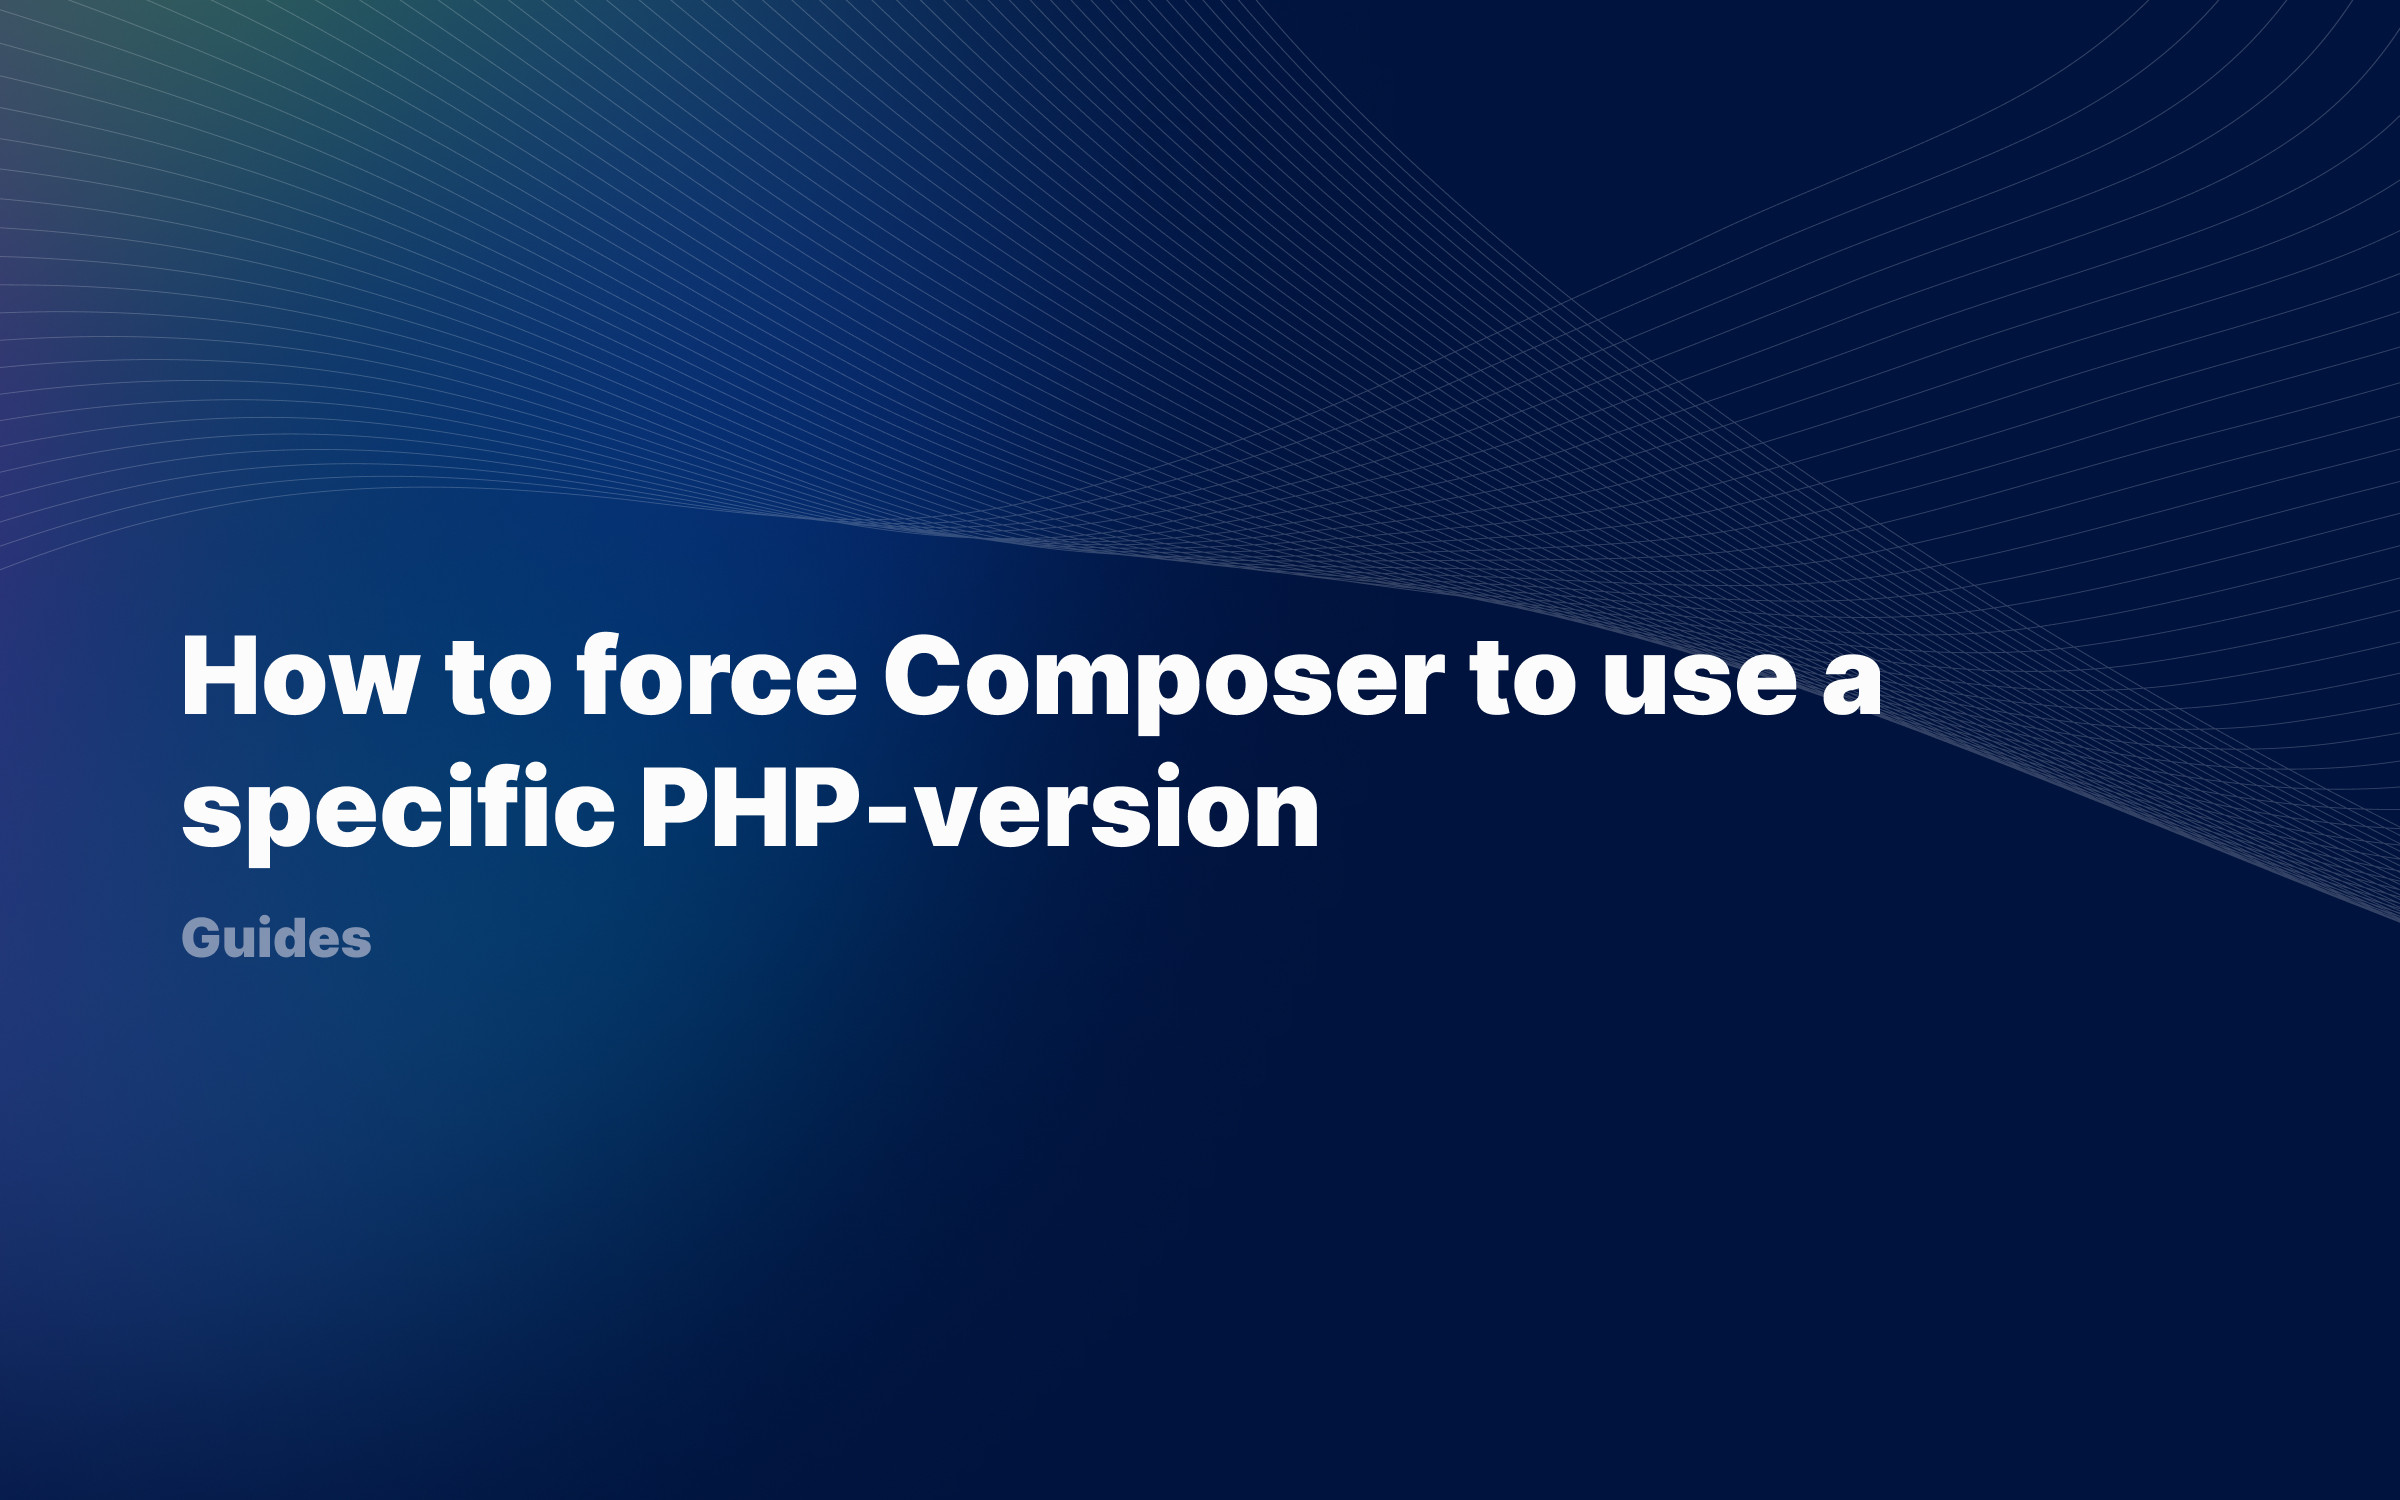 How to force Composer to use a specific PHP-version